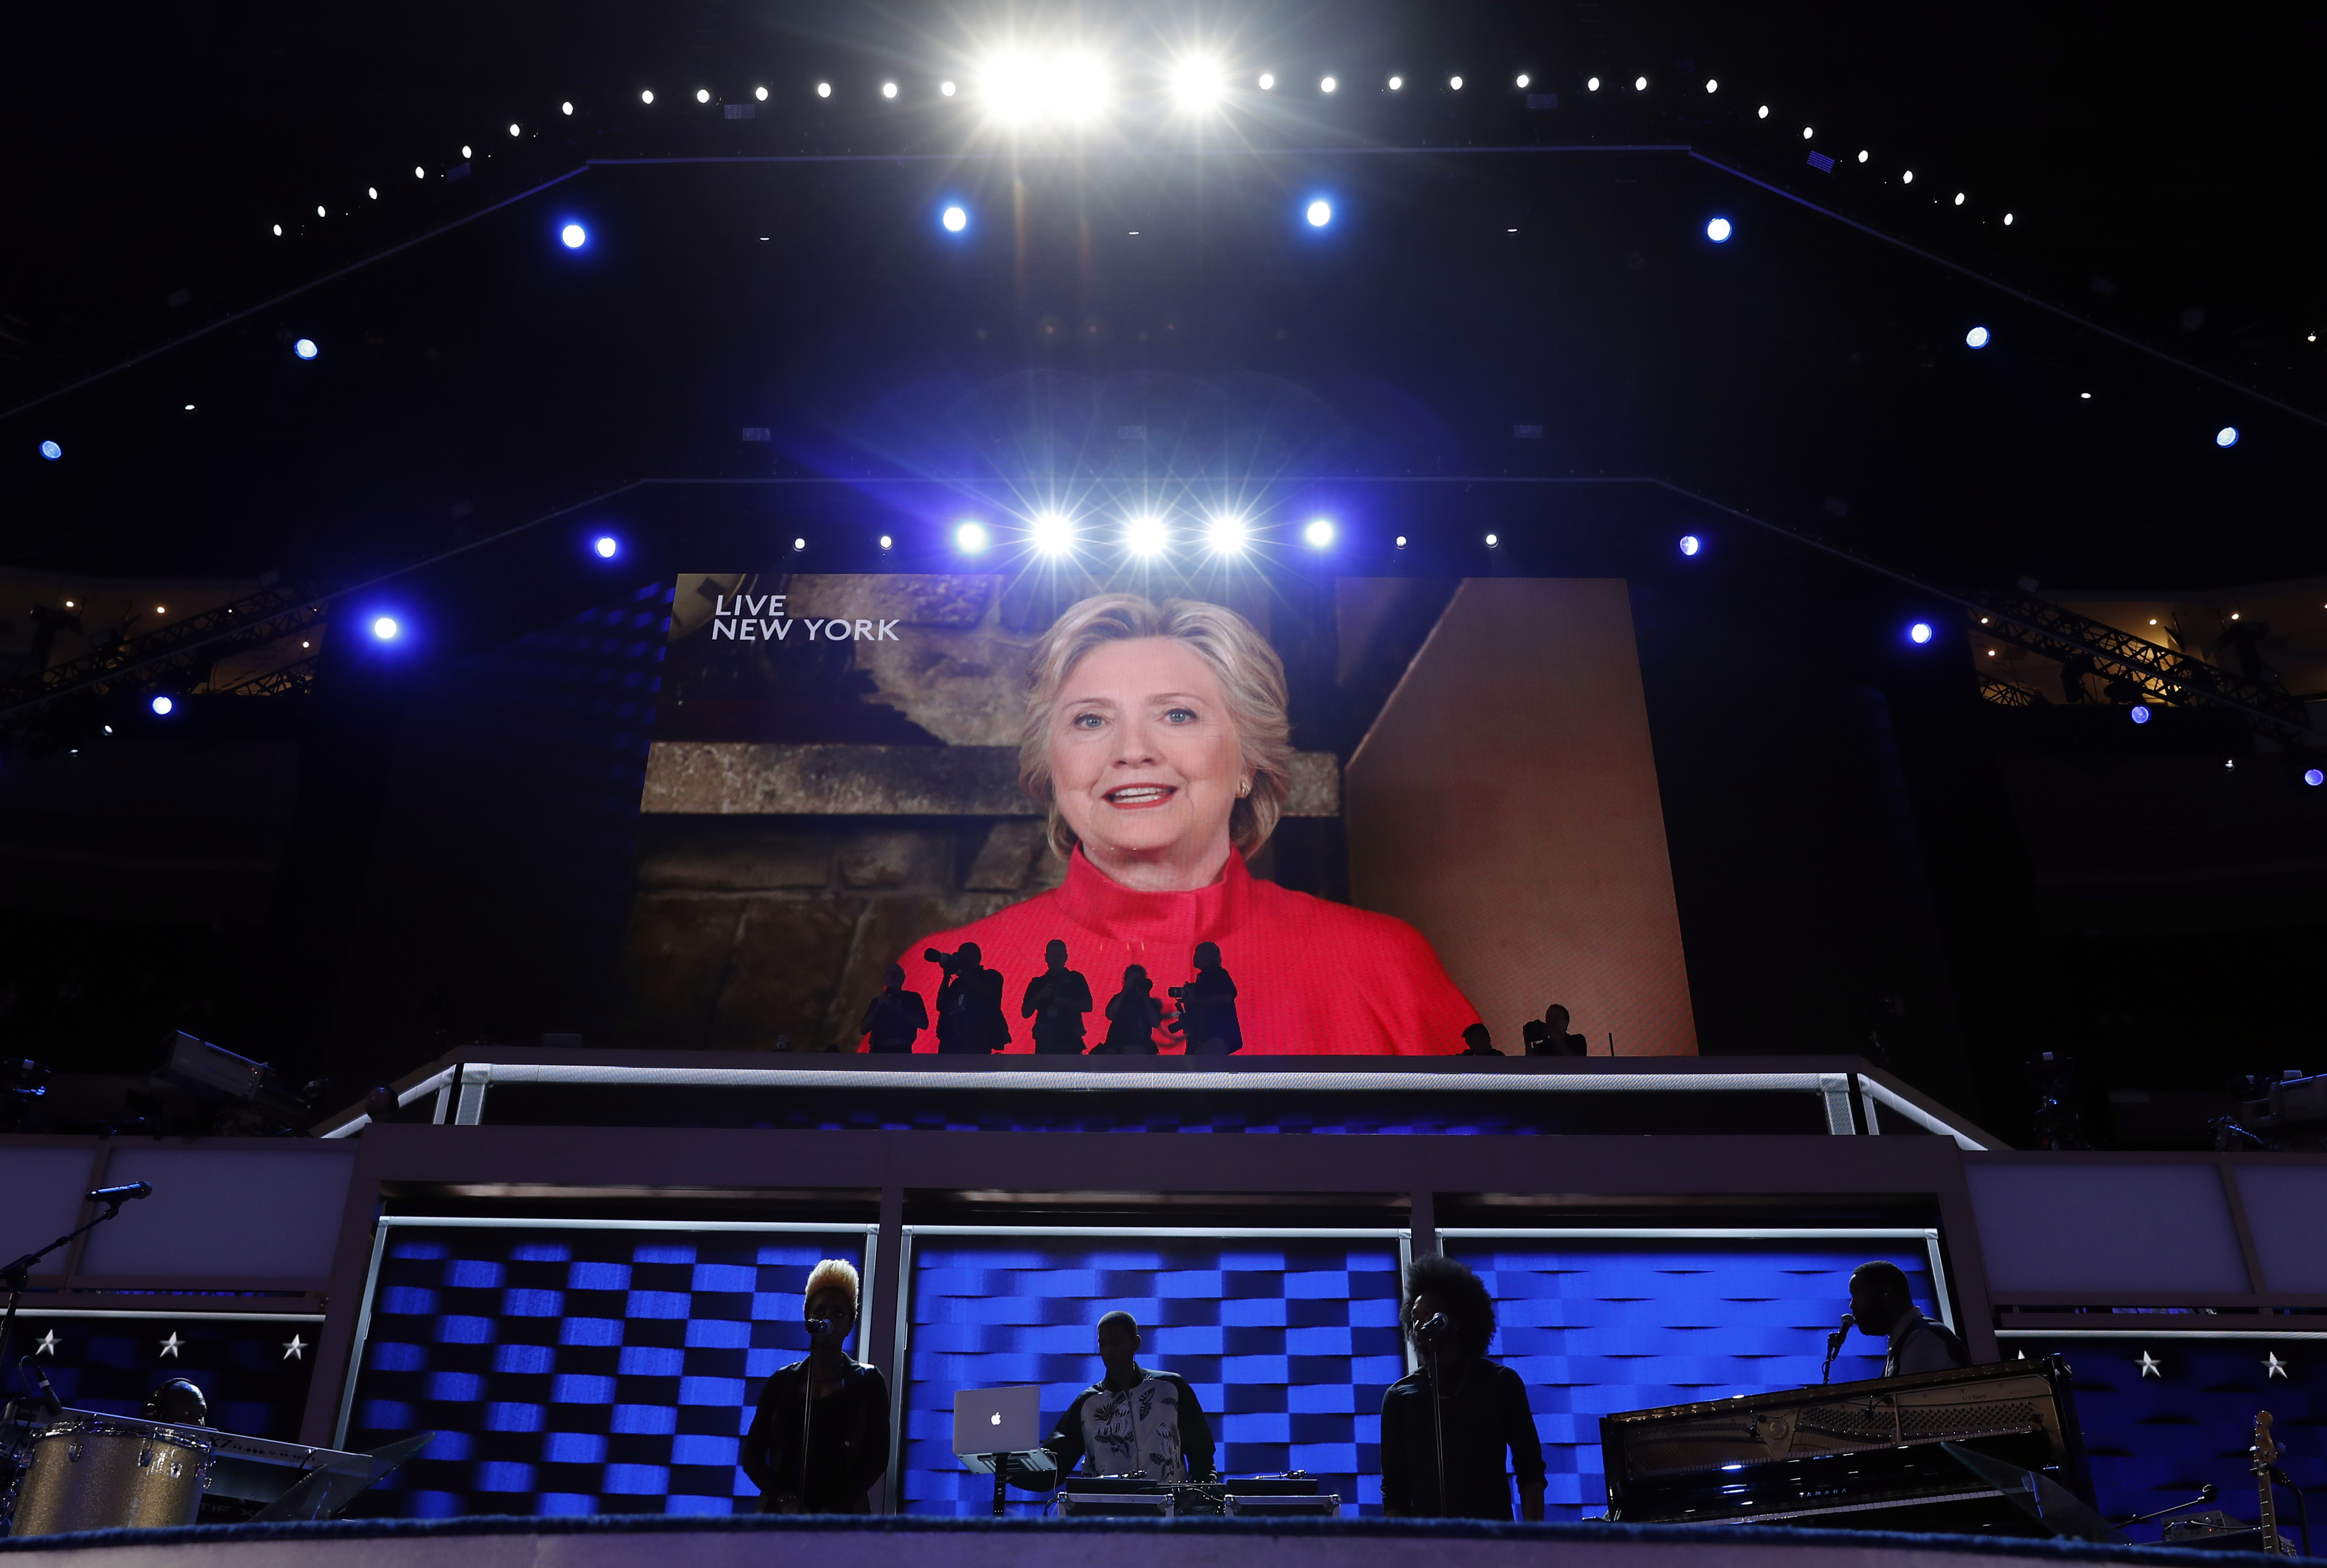 Democratic Presidential candidate Hillary Clinton appears on the screen during the second day session of the Democratic National Convention in Philadelphia, Tuesday, July 26, 2016. (AP Photo/Carolyn Kaster)